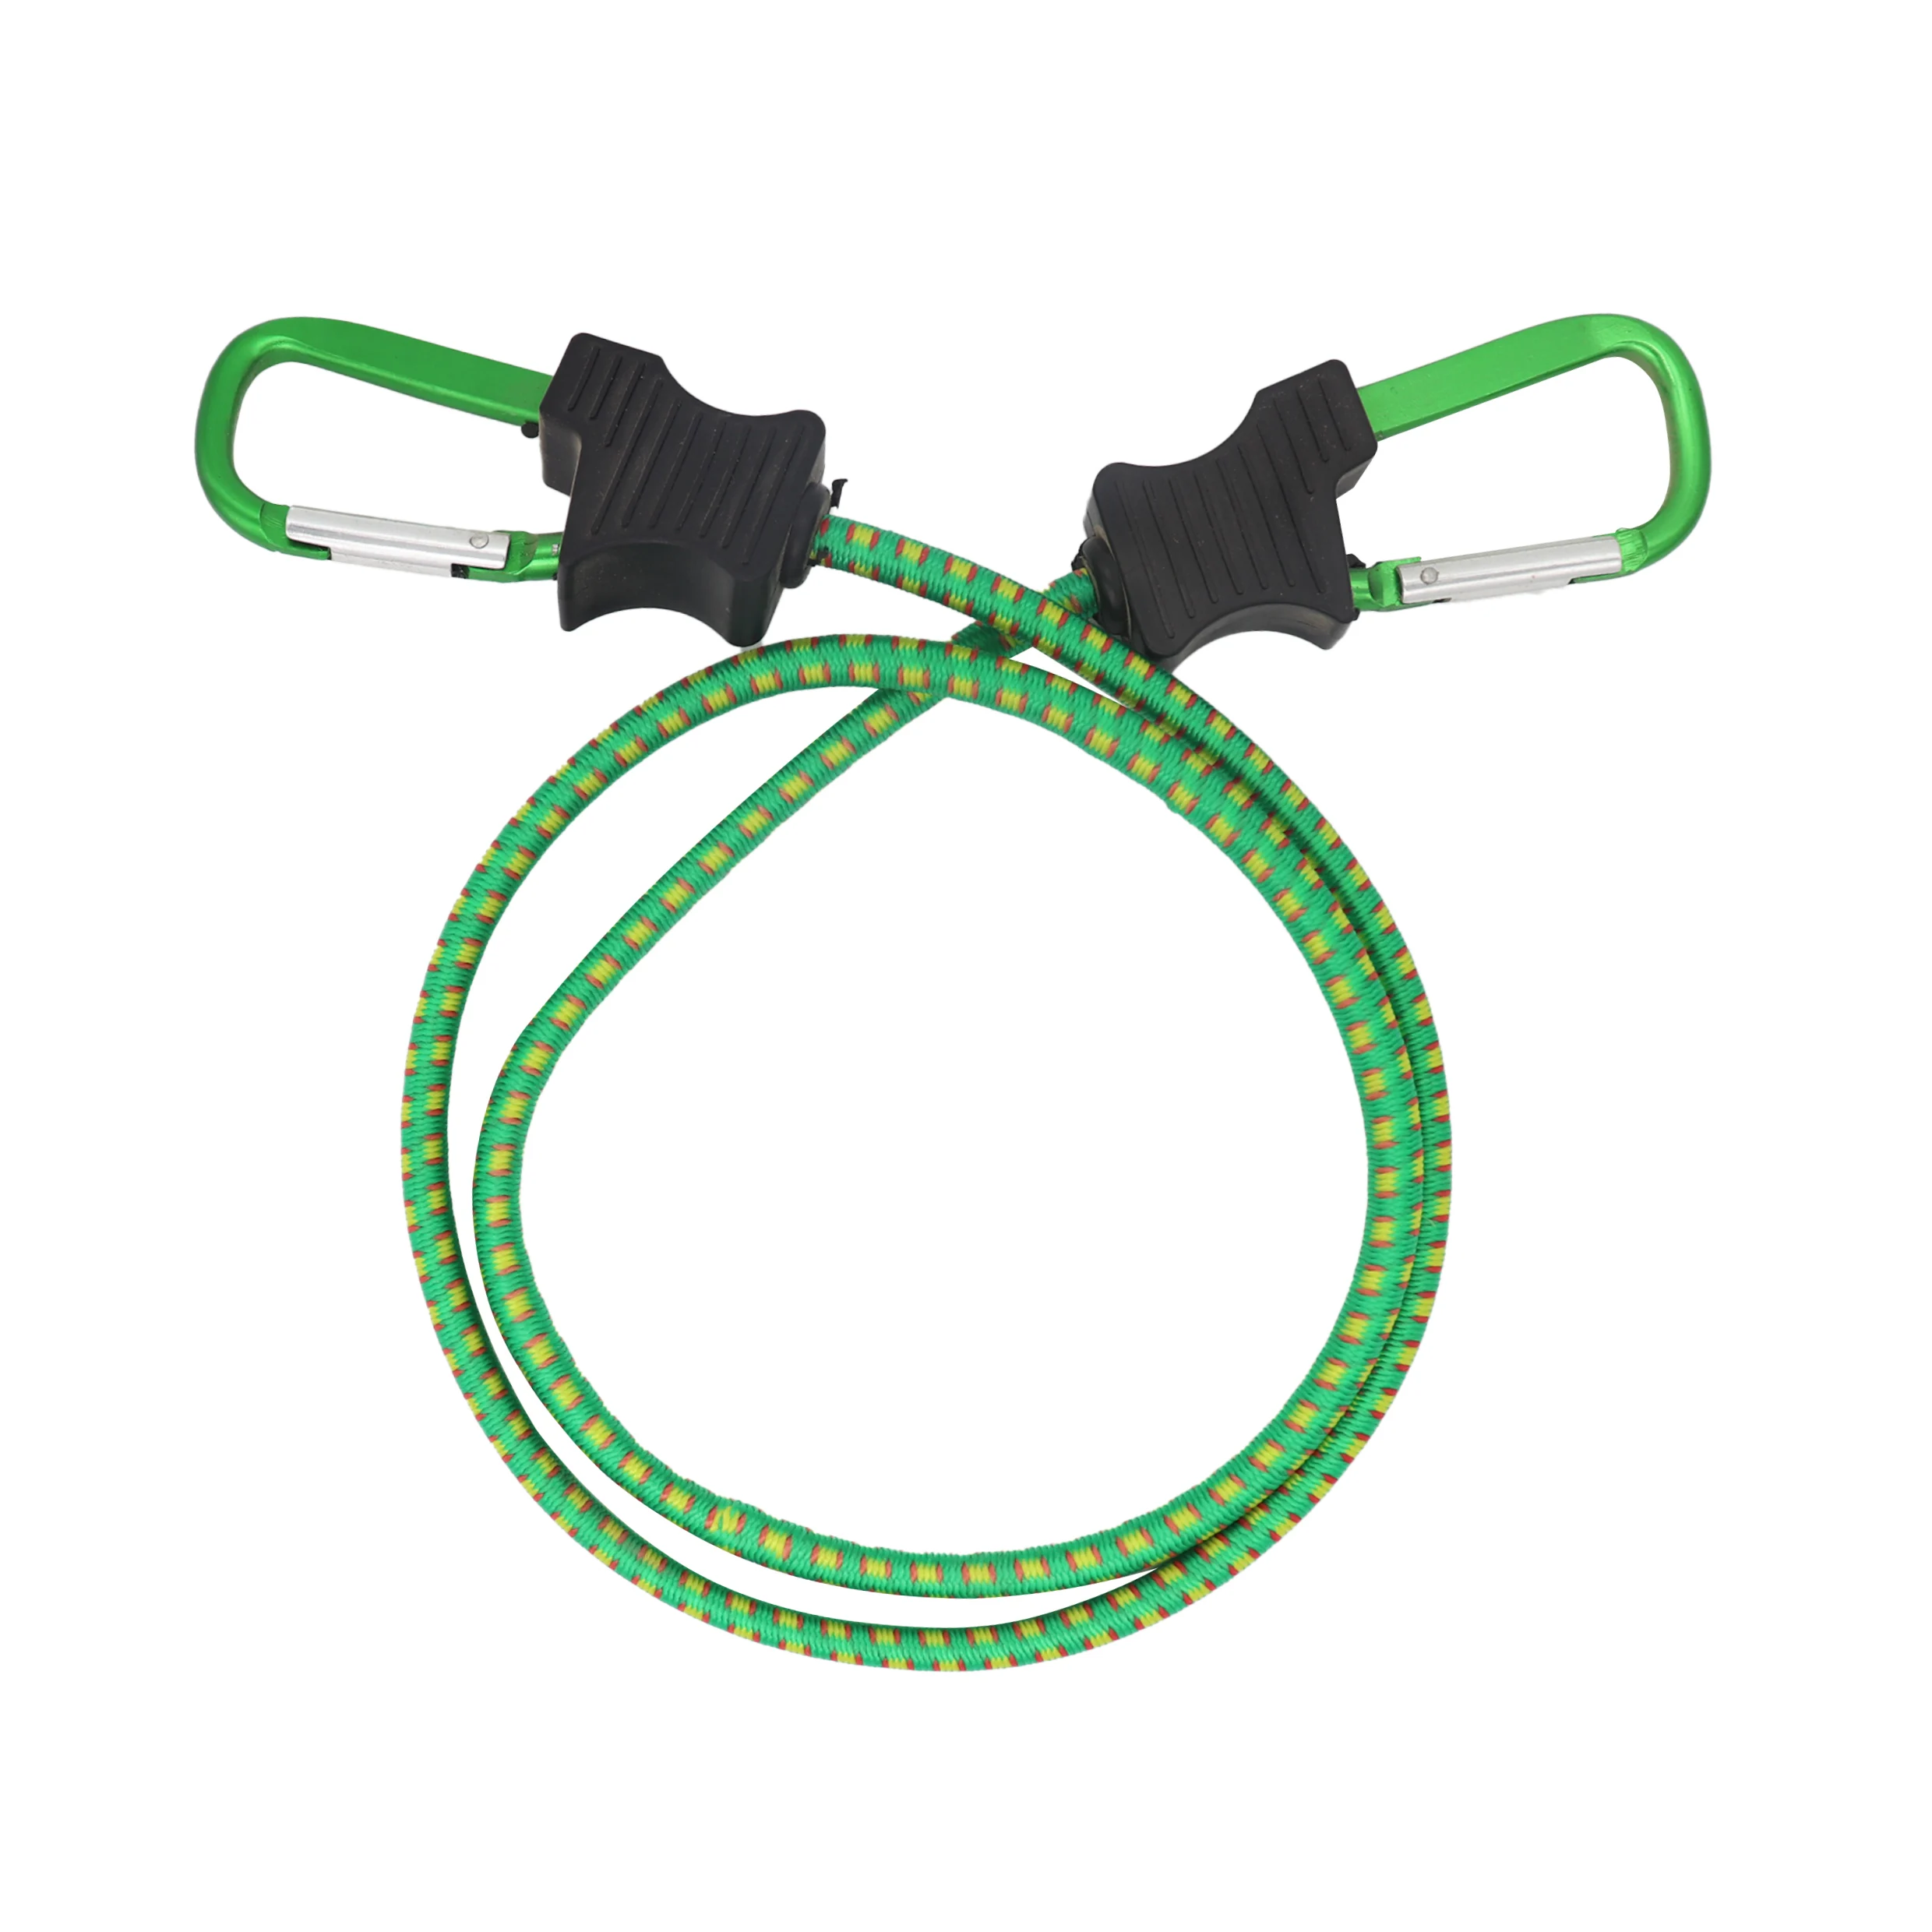 heavy duty bungee cord rope ties elastic bungee cord green bungee for tent removable livestock tent pvc 550 g m² 3 3x16 m dark green